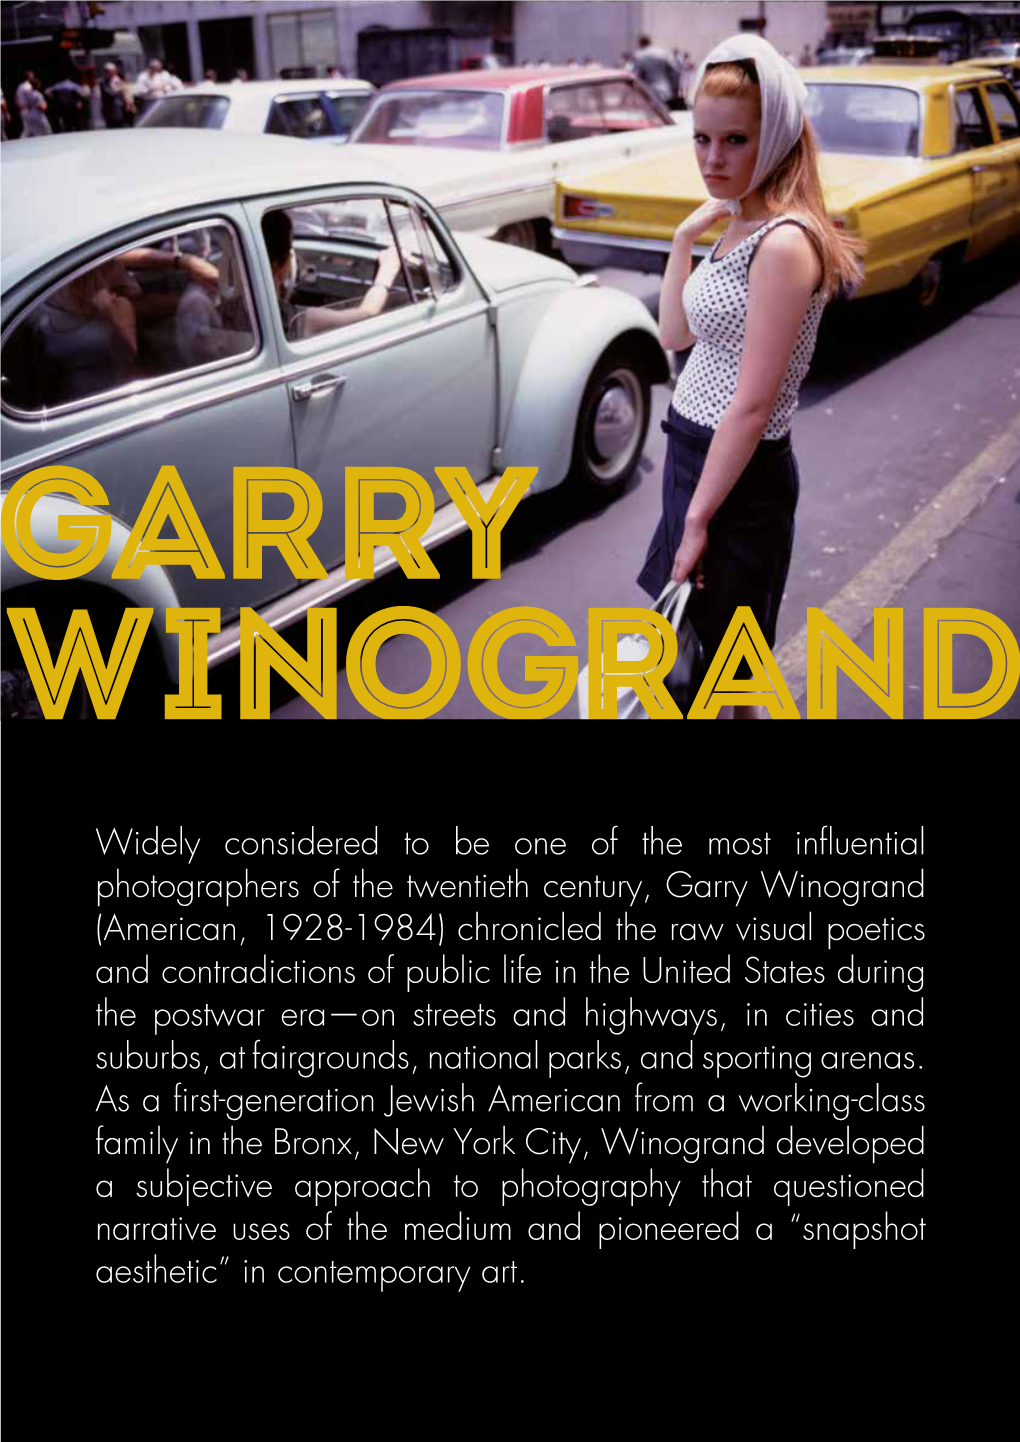 Widely Considered to Be One of the Most Influential Photographers of the Twentieth Century, Garry Winogrand (American, 1928-1984